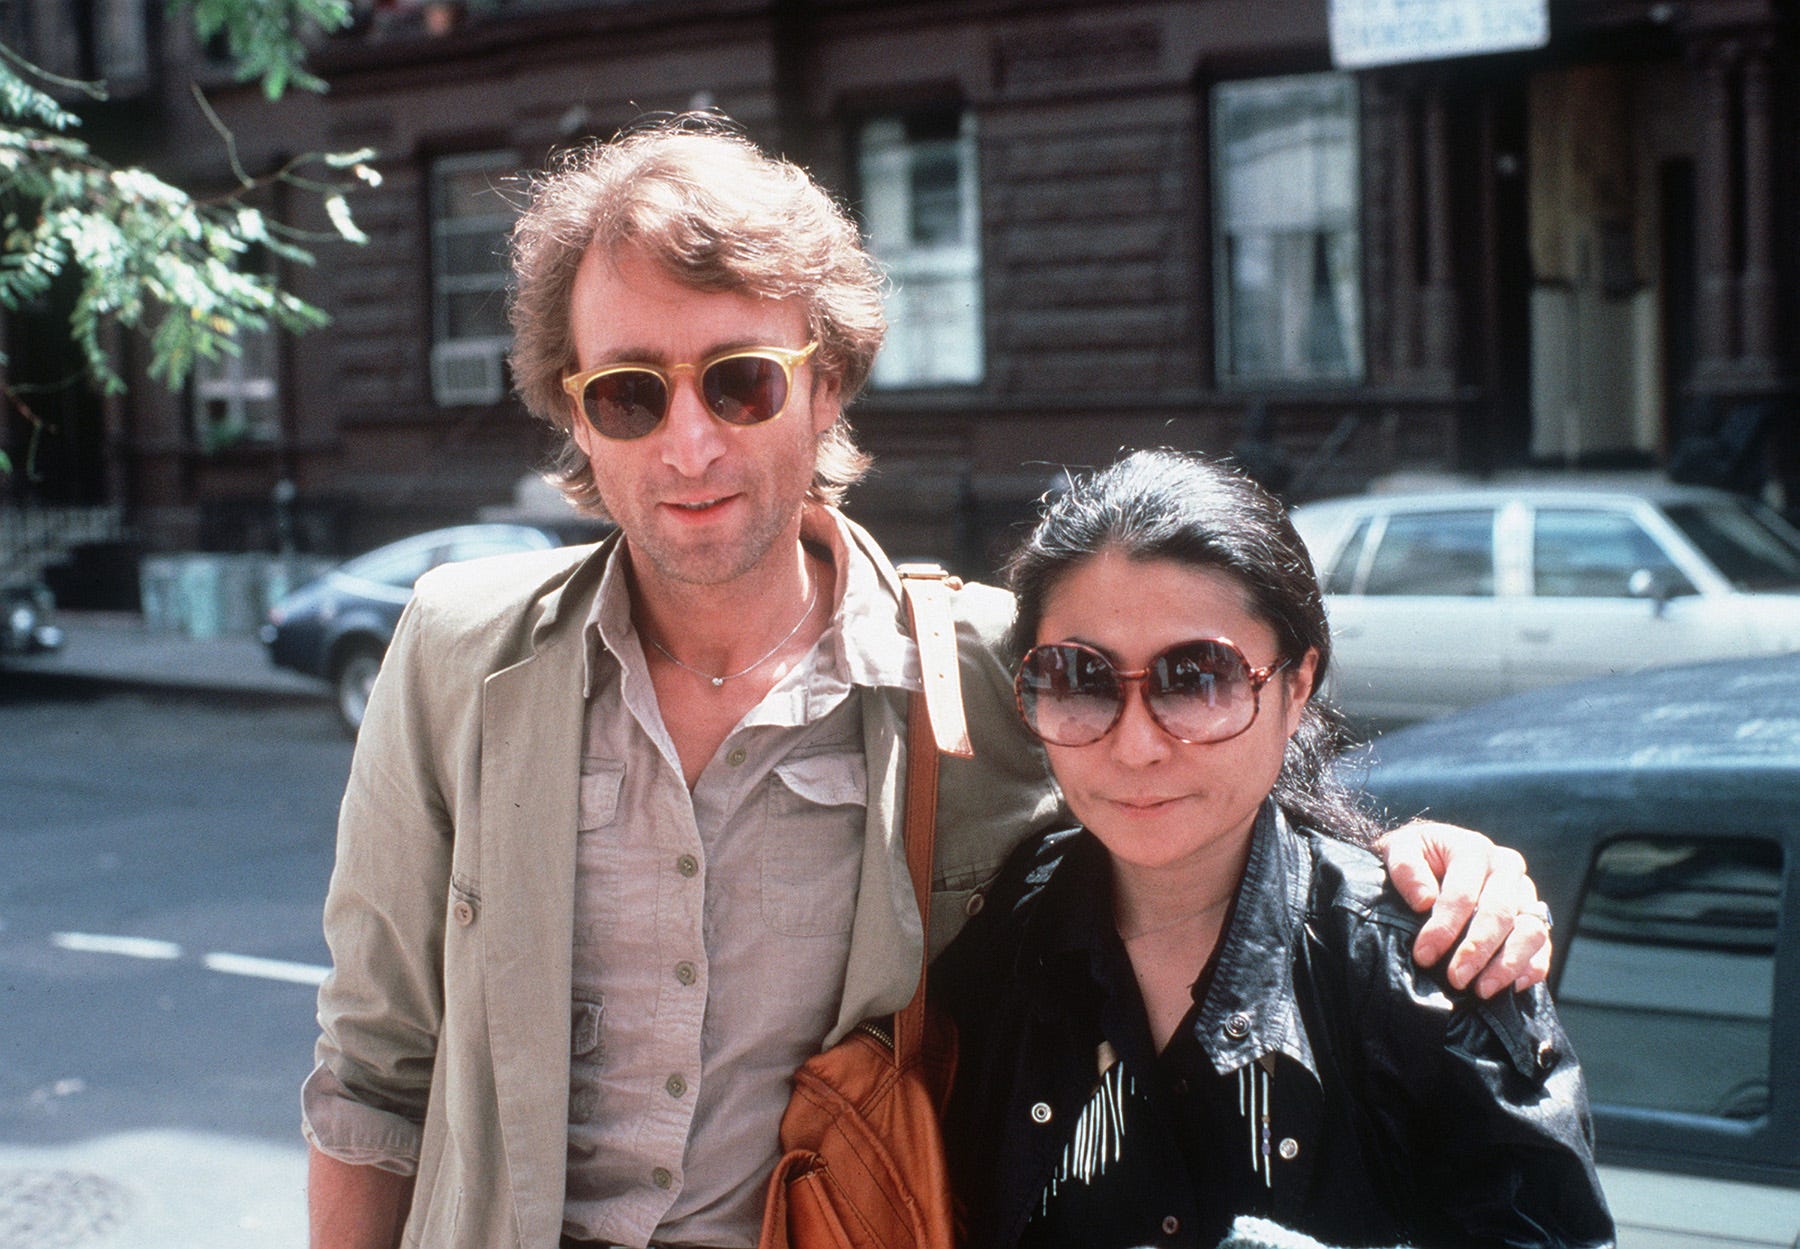 John Lennon, gone 40 years, but his music and legacy live on